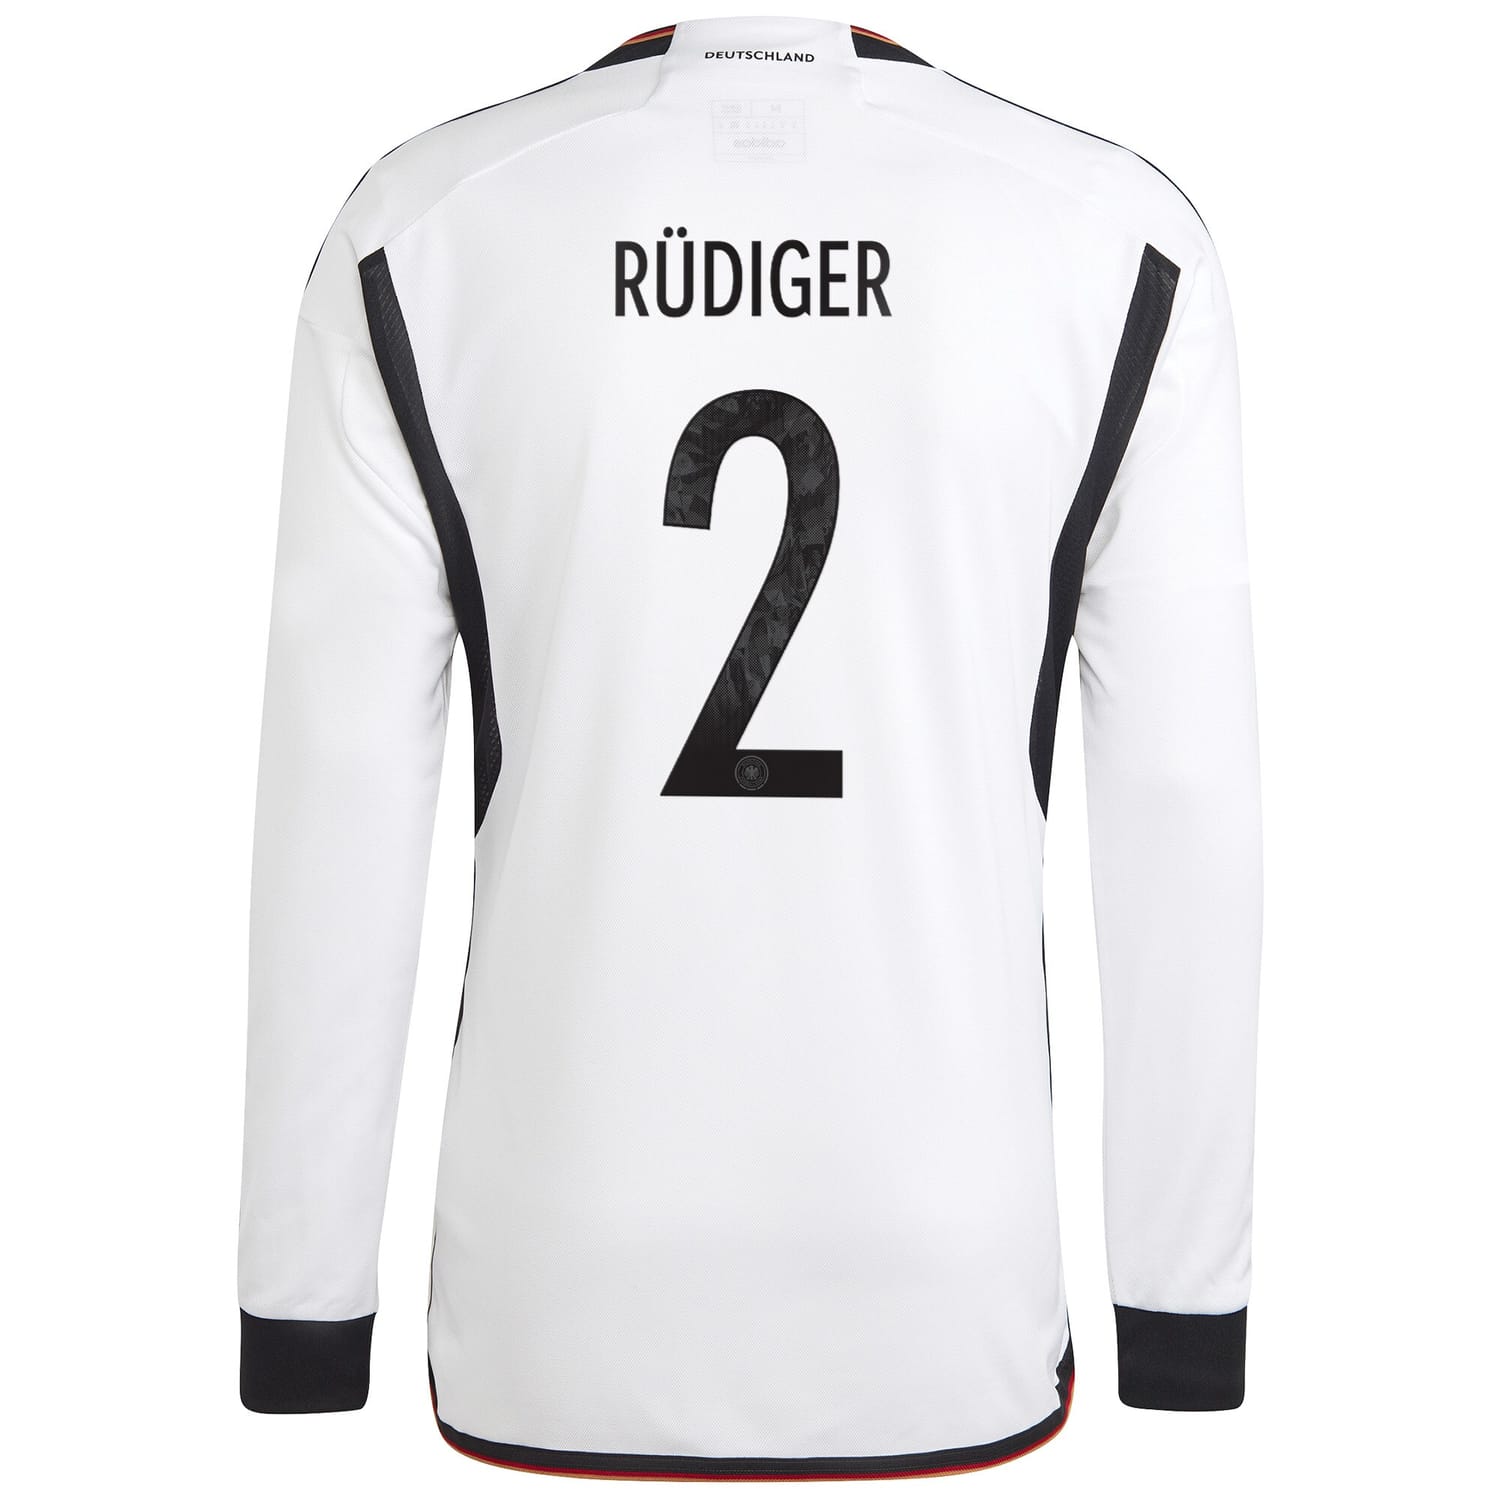 Germany National Team Jersey Shirt Long Sleeve White 2022-23 player Antonio Rüdiger printing for Men